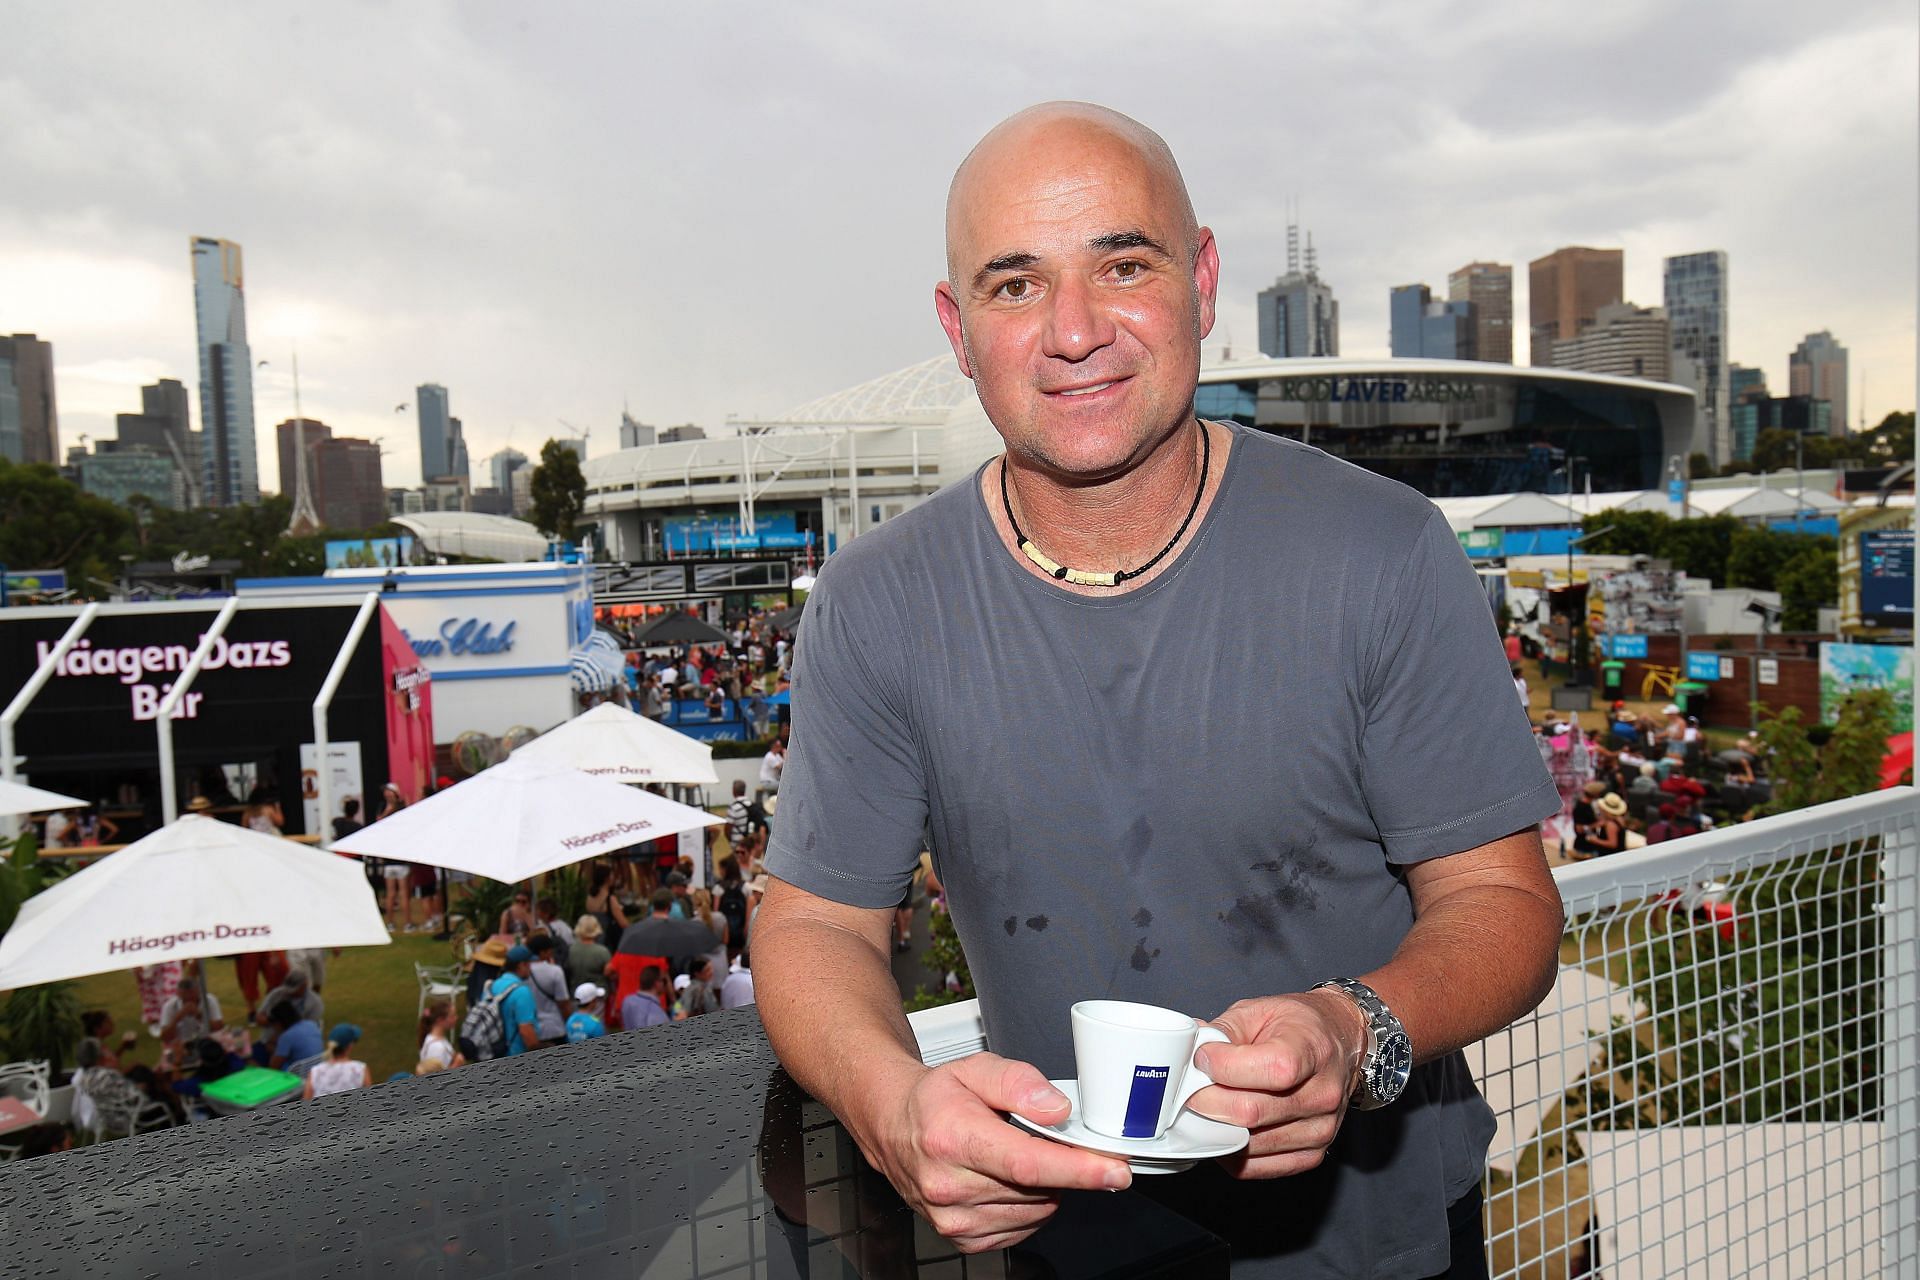 Andre Agassi pictured off-court at the 2019 Australian Open.